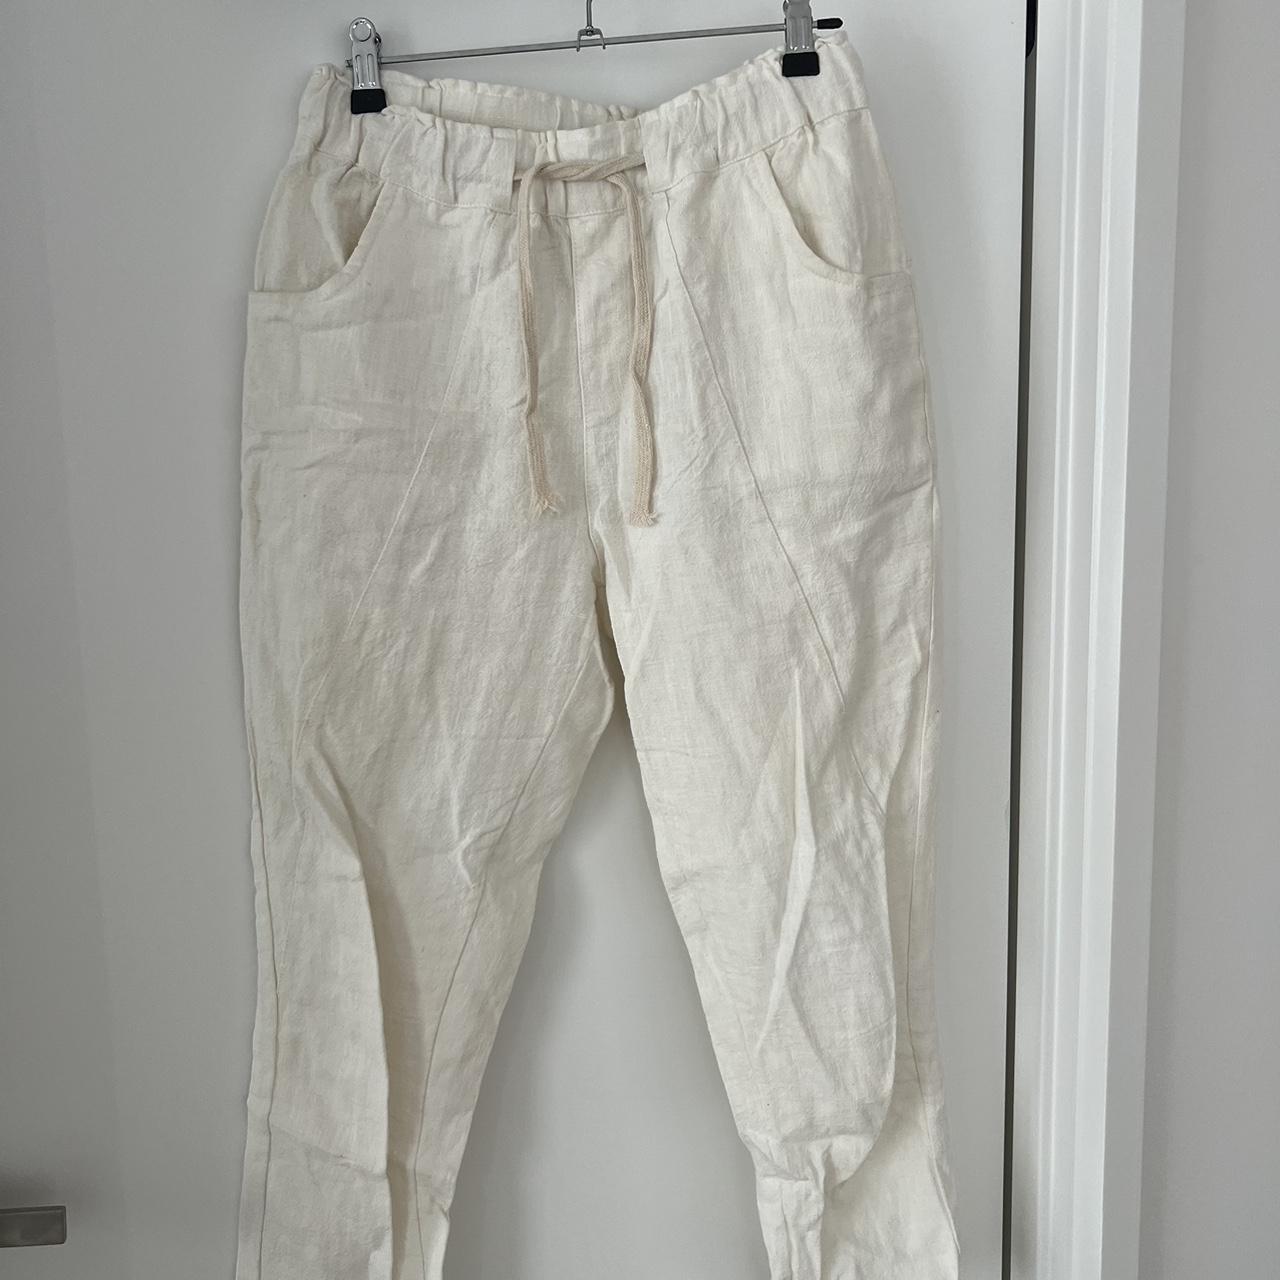 Slightly off white ankle grazing linen pants with a... - Depop